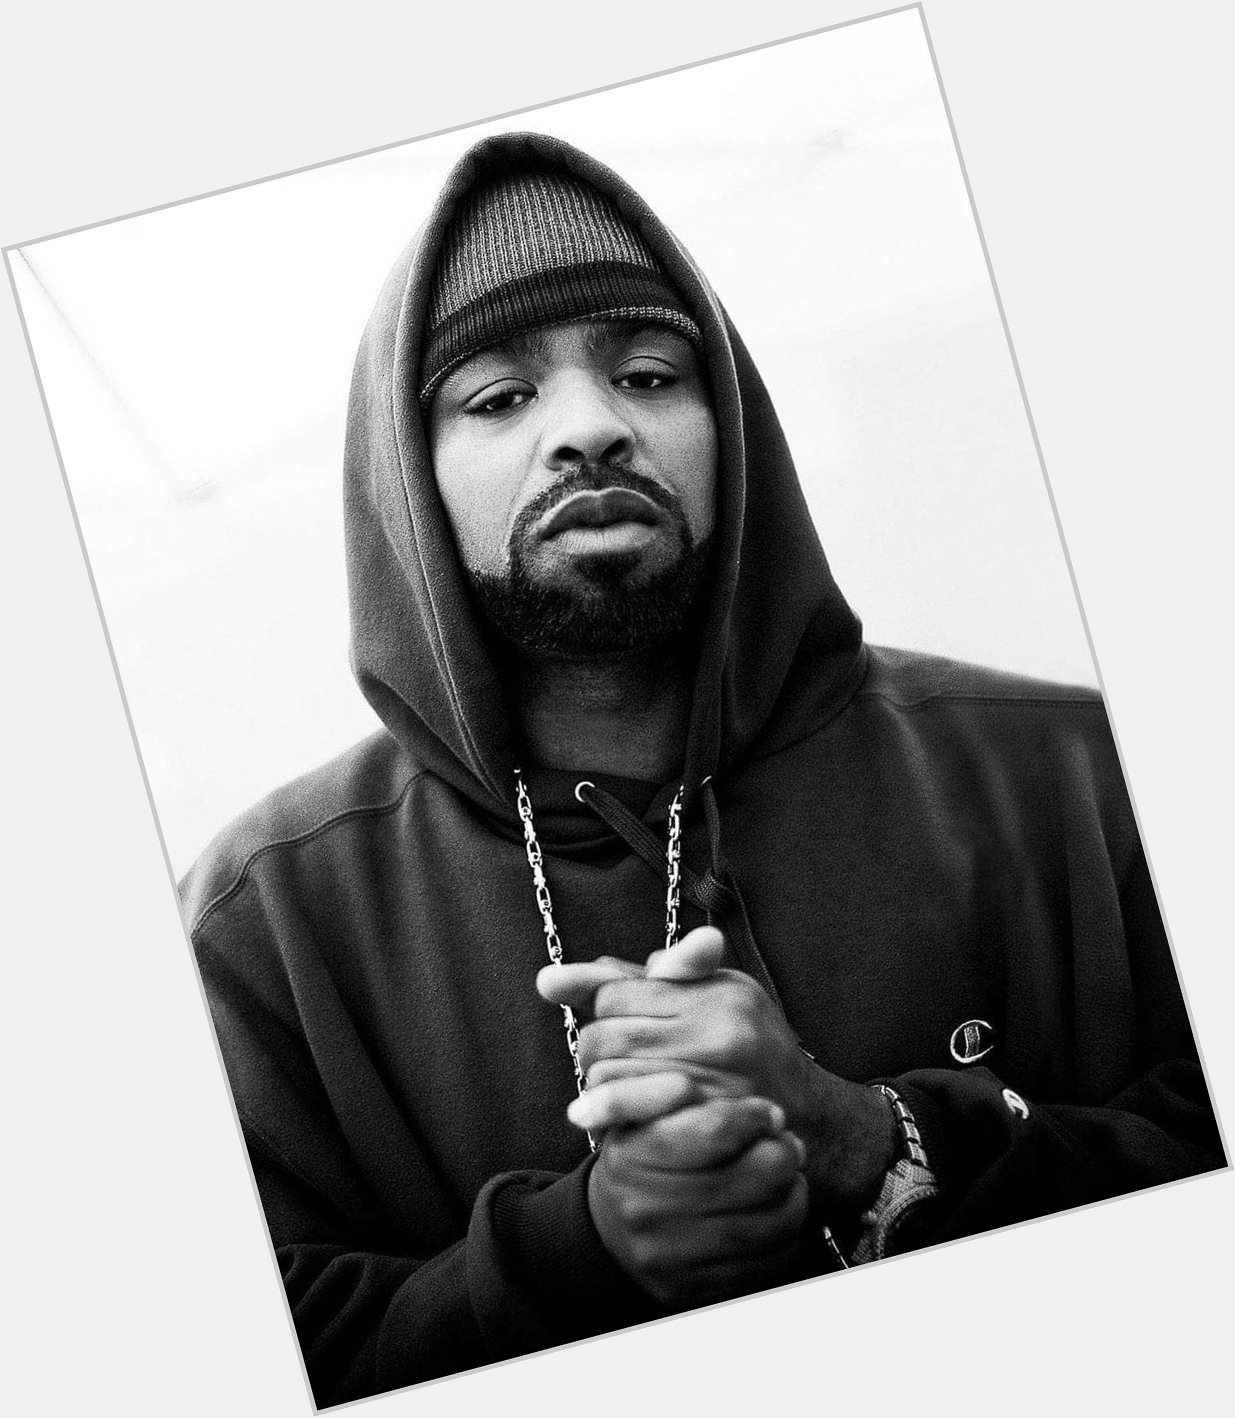 Clifford Smith (Method Man), turns 49 years today.
Happy Birthday.  